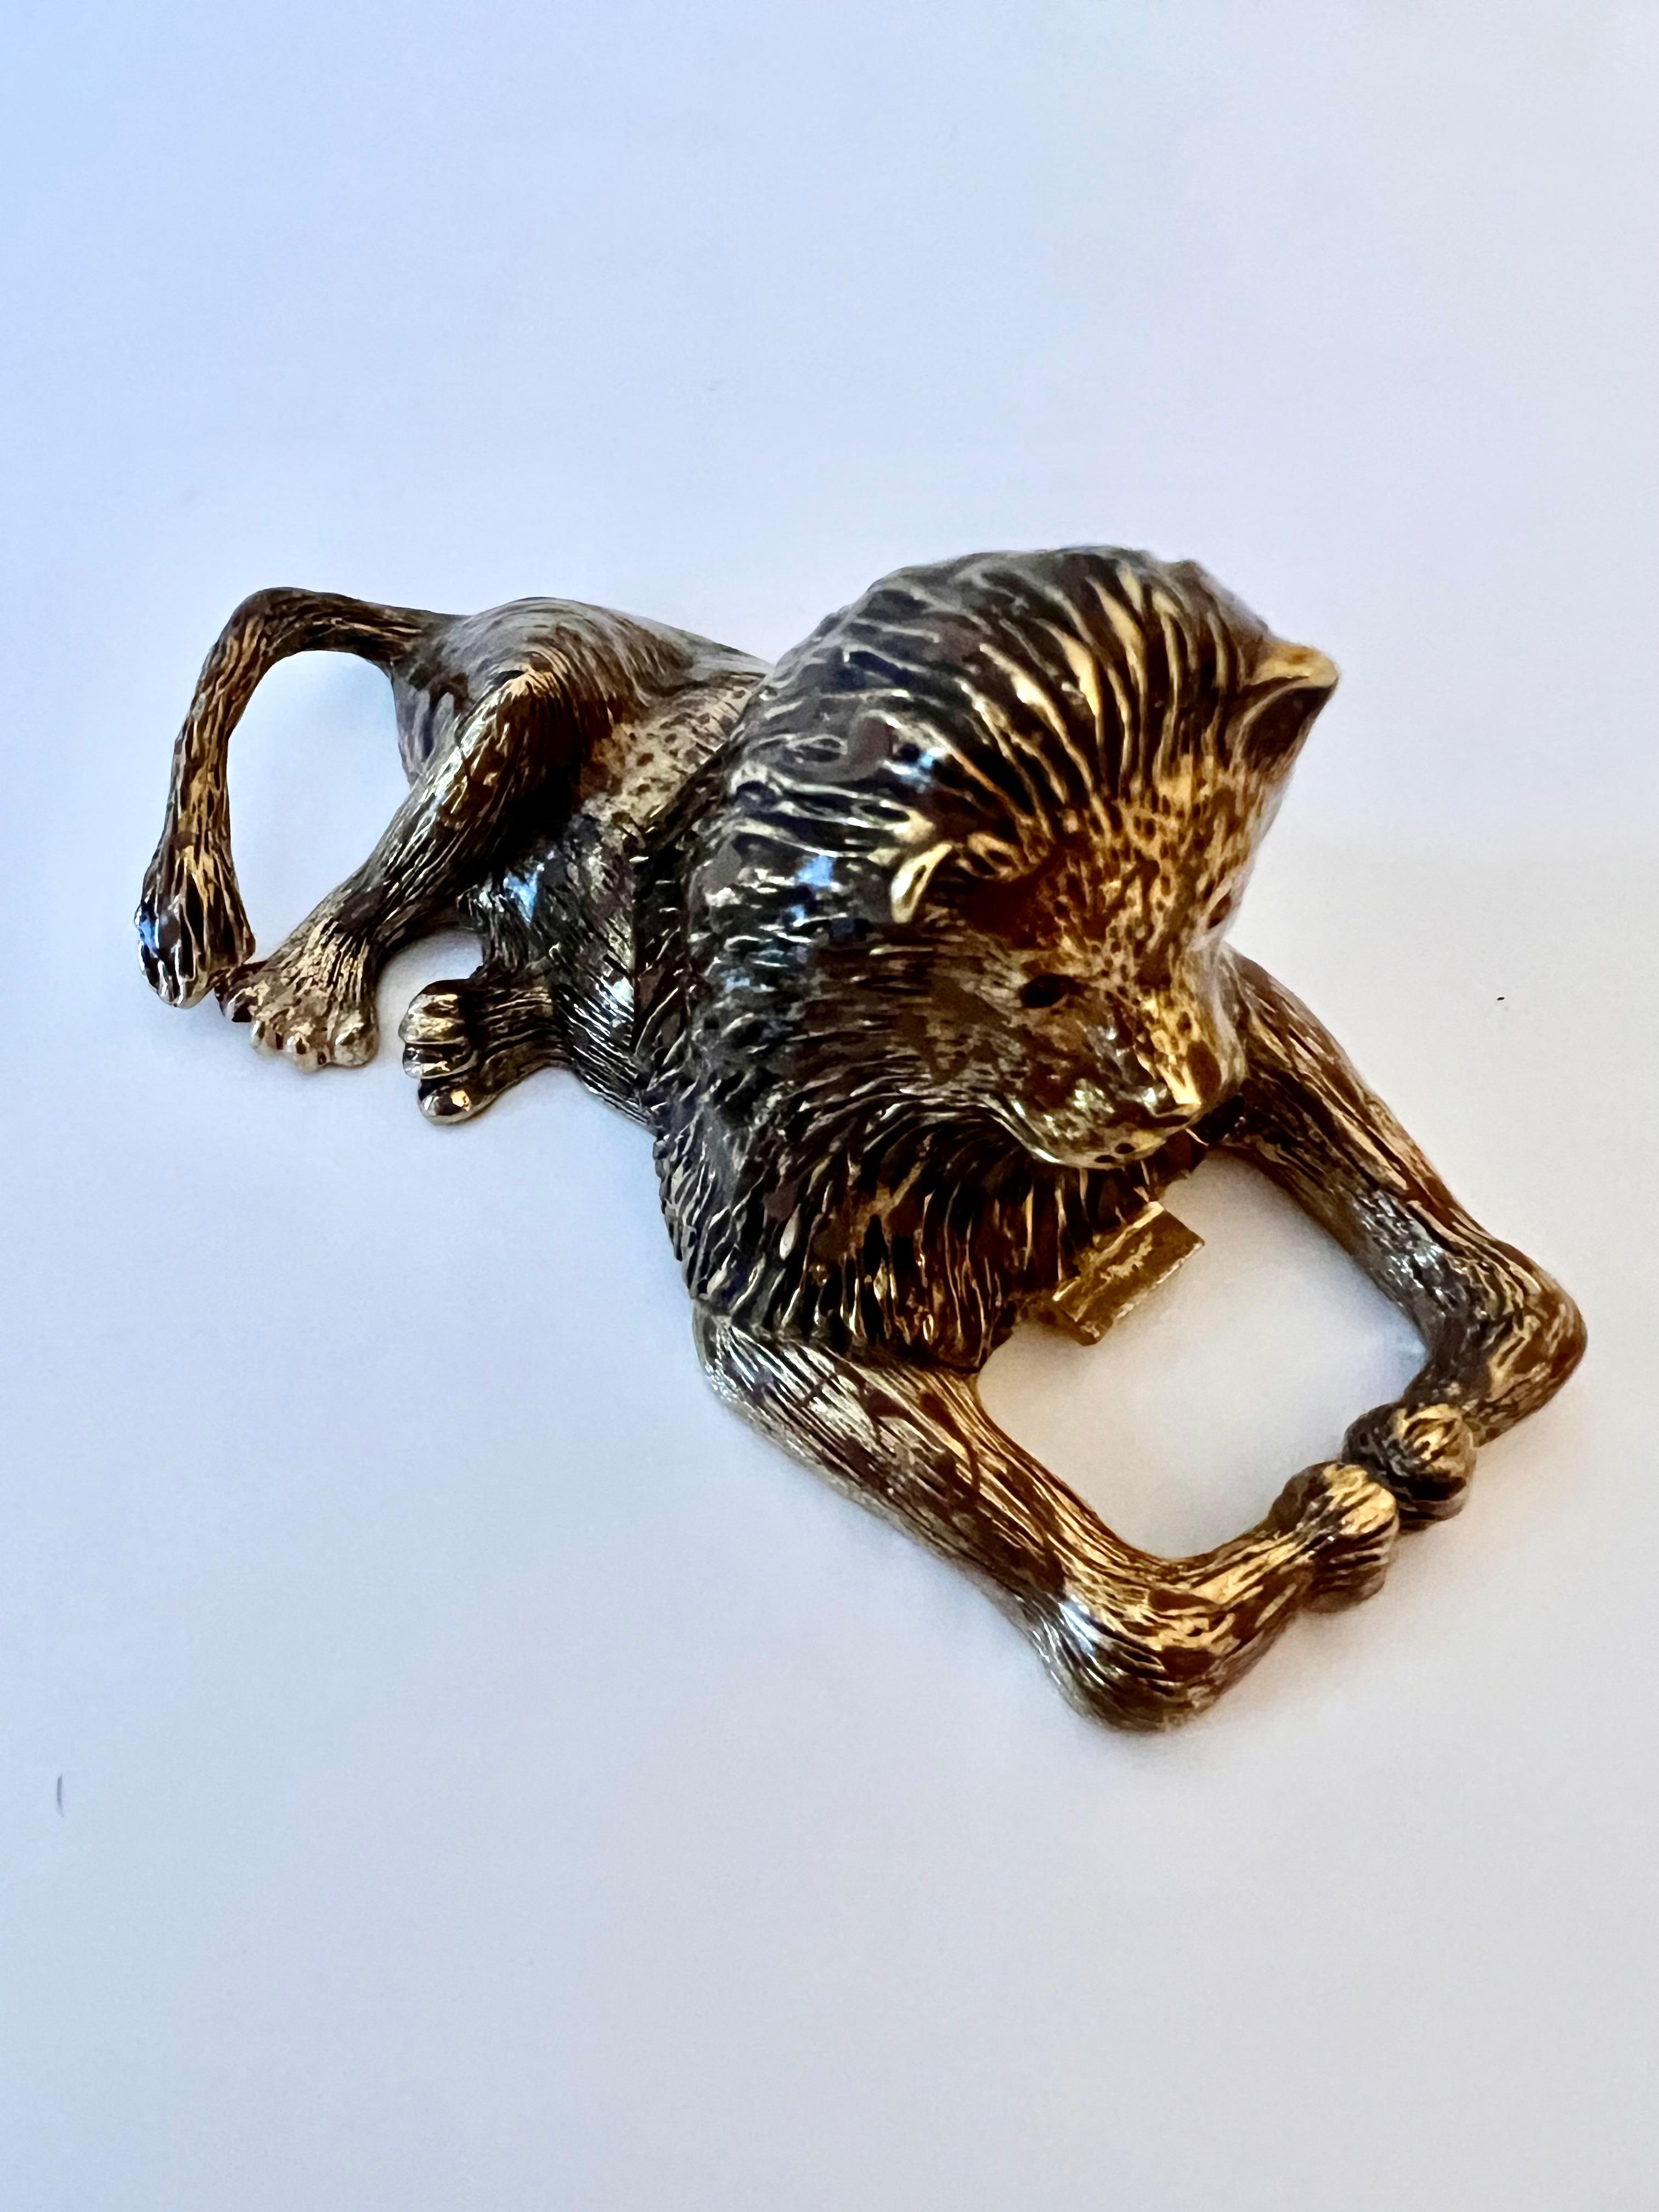 A gilt lion bottle opener ready for the kitchen or bar.   The reclining piece is perfect for the bar aficionado or with a bar with a theme.  The eyes are a topaz style stone.  a compliment to many bars